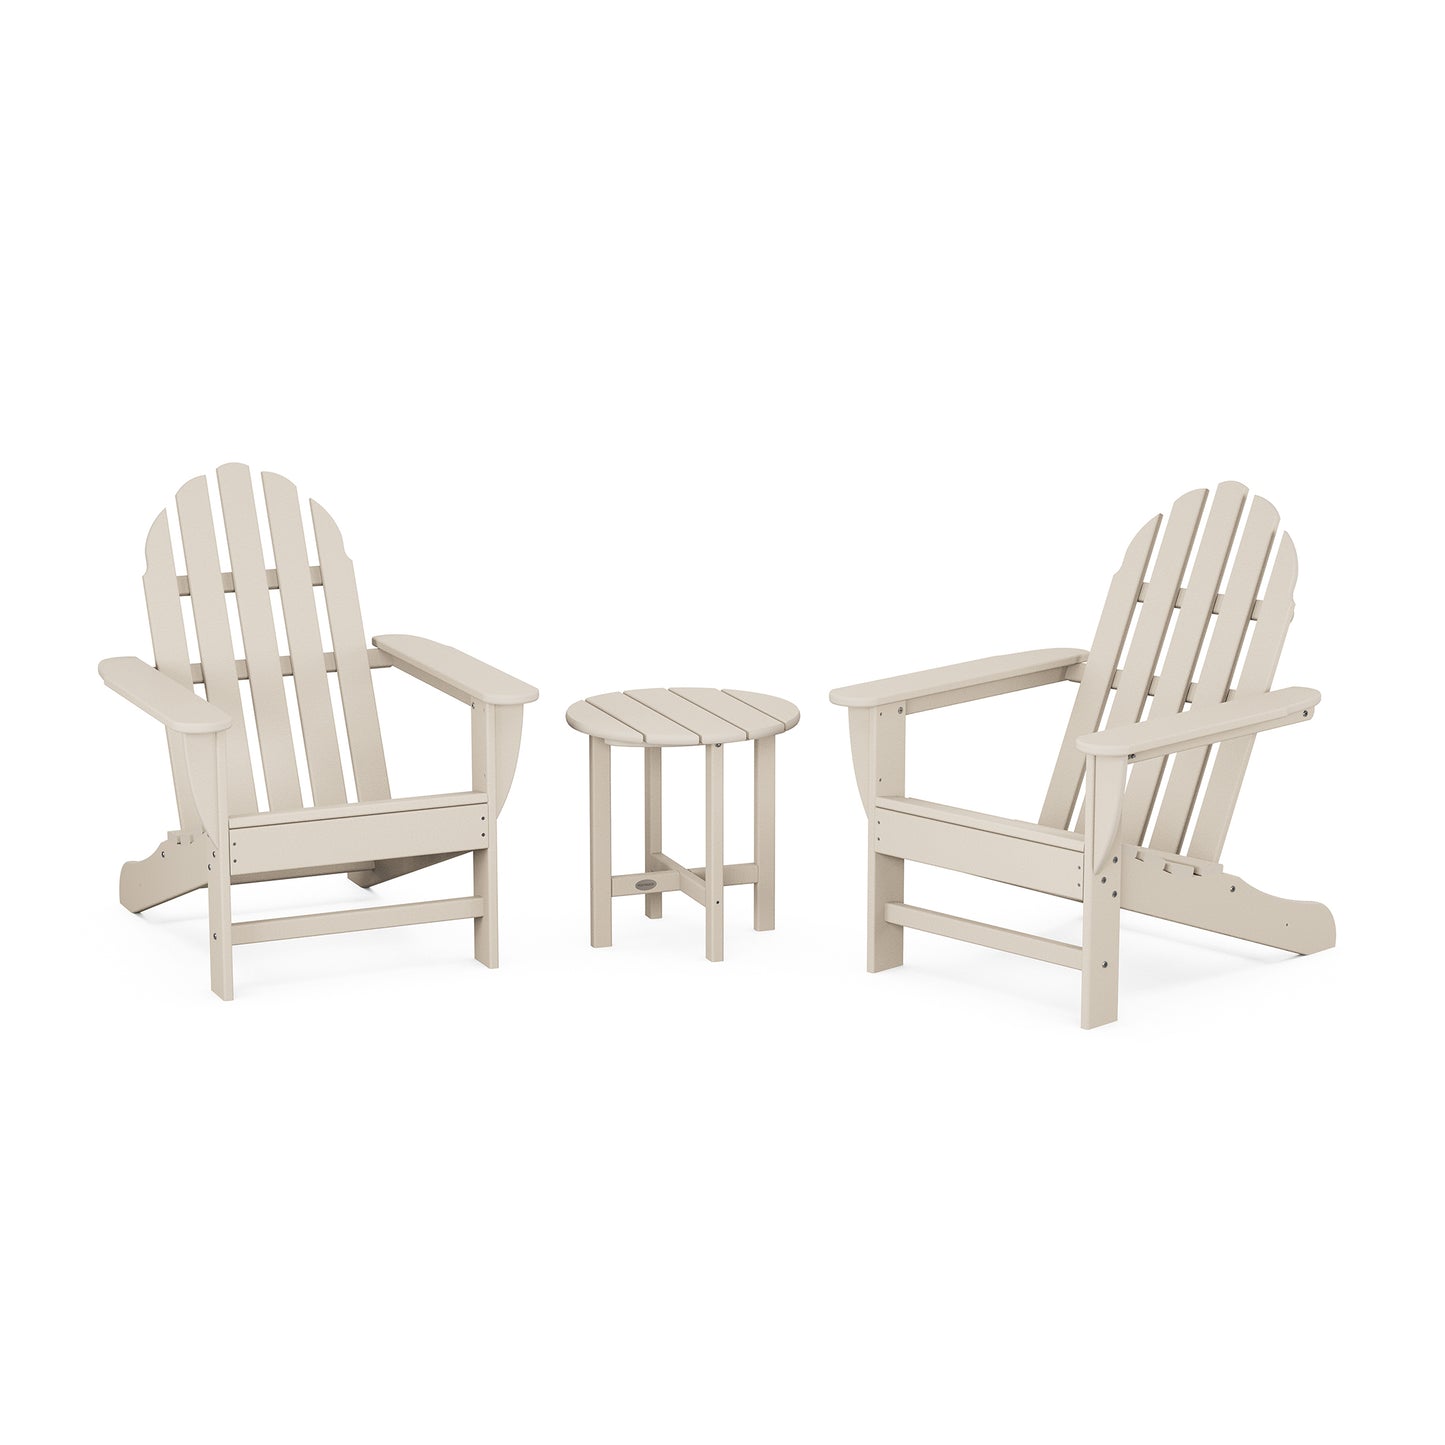 Two beige POLYWOOD Classic Adirondack chairs with a small matching table set between them, depicted on a white background.